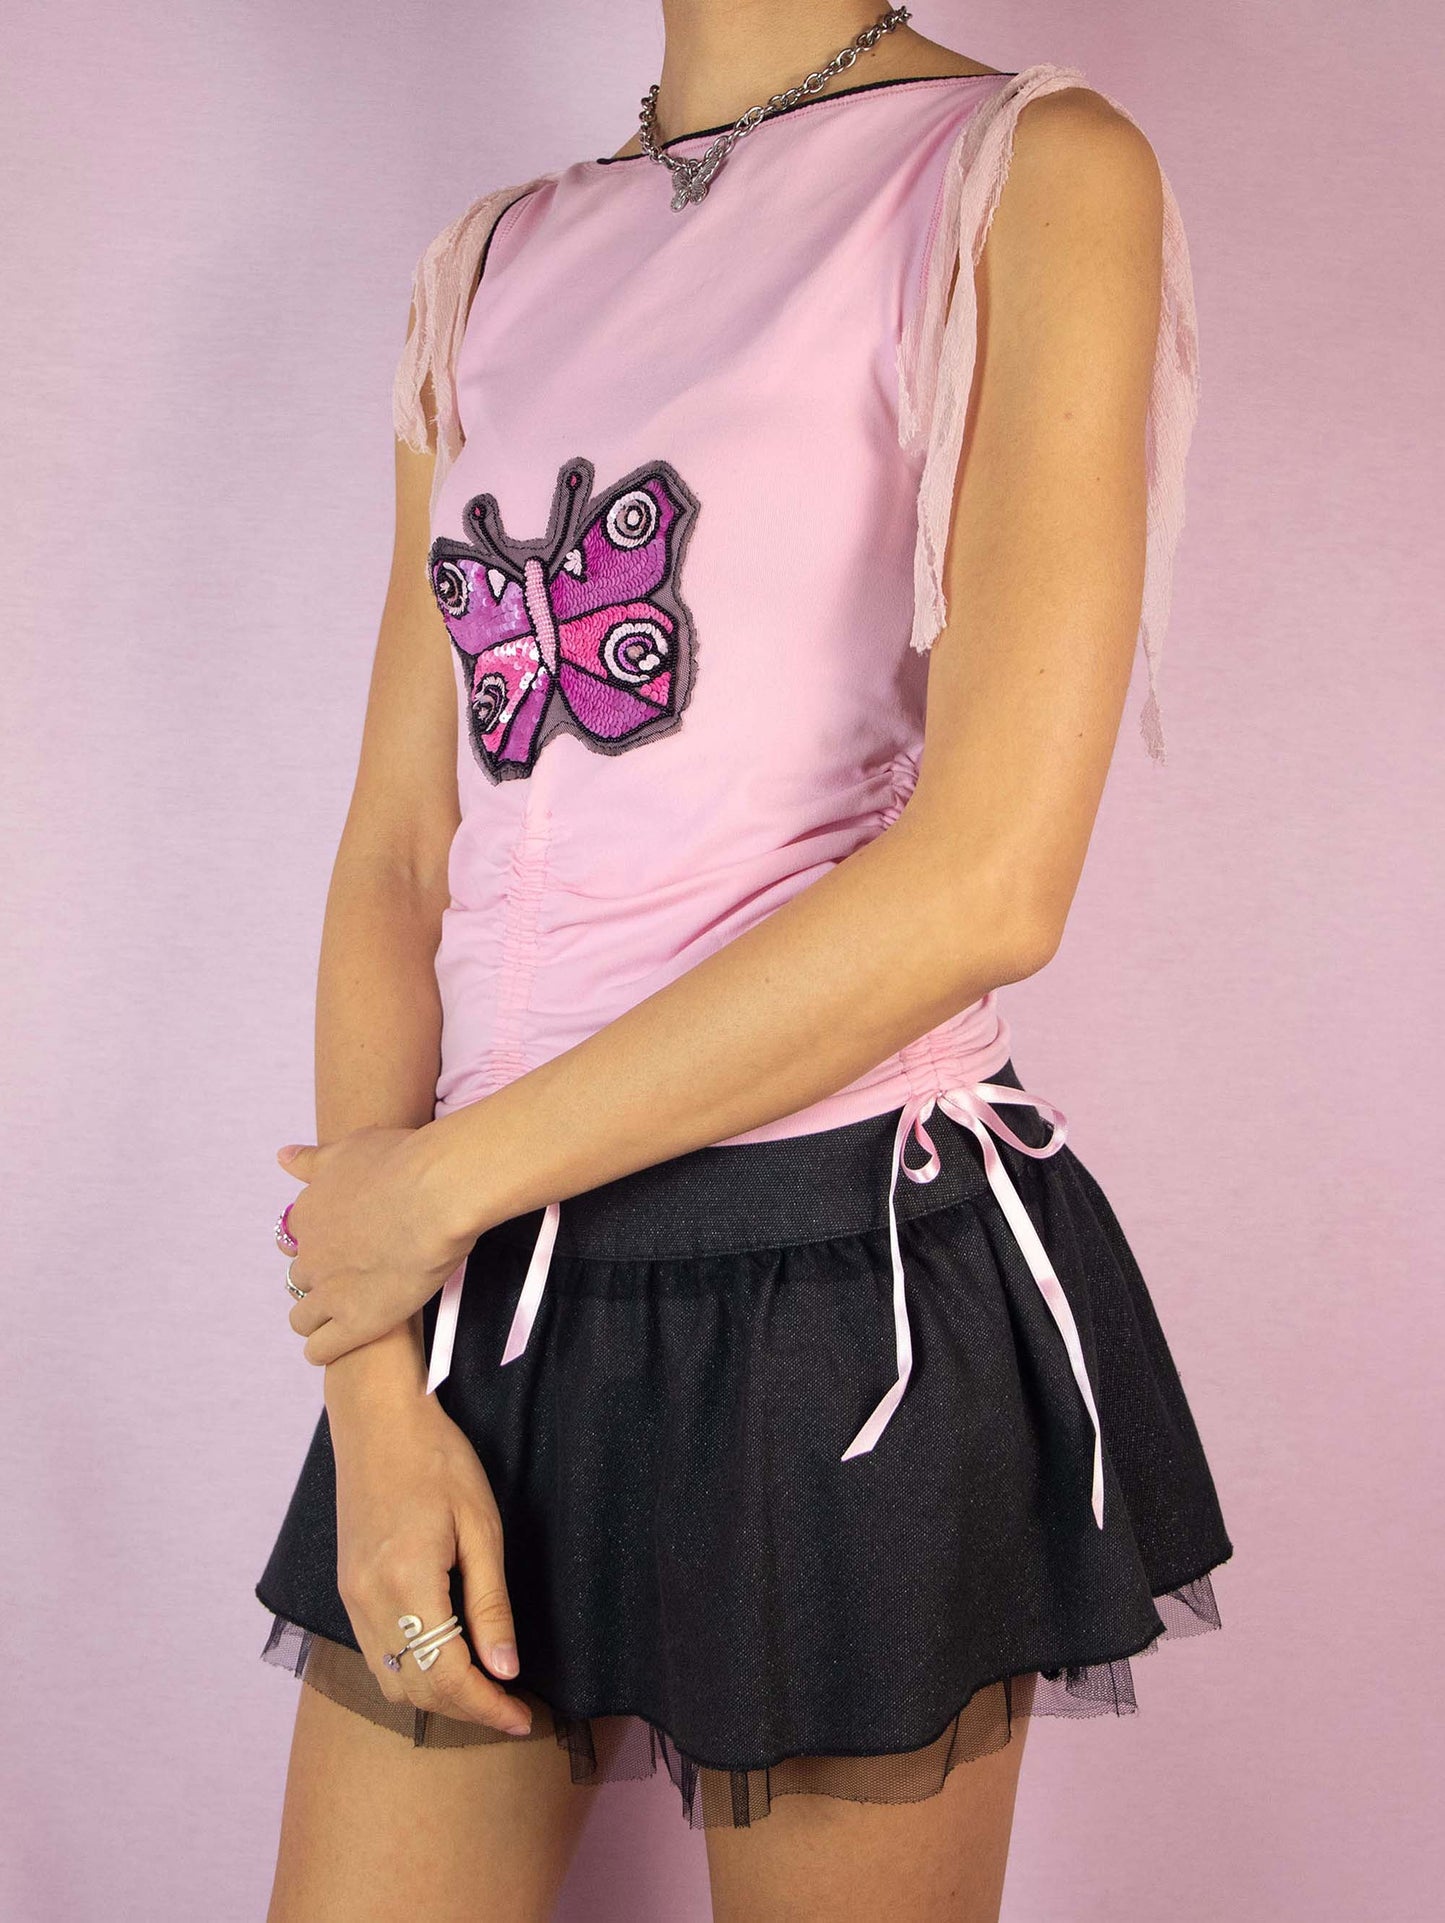 The Y2K Pink Sleeveless Ruched Top is a vintage 2000s elastic top for summer festival parties, light pastel pink, embellished with sequins and beads, and with bow details that tie. Made in Italy.